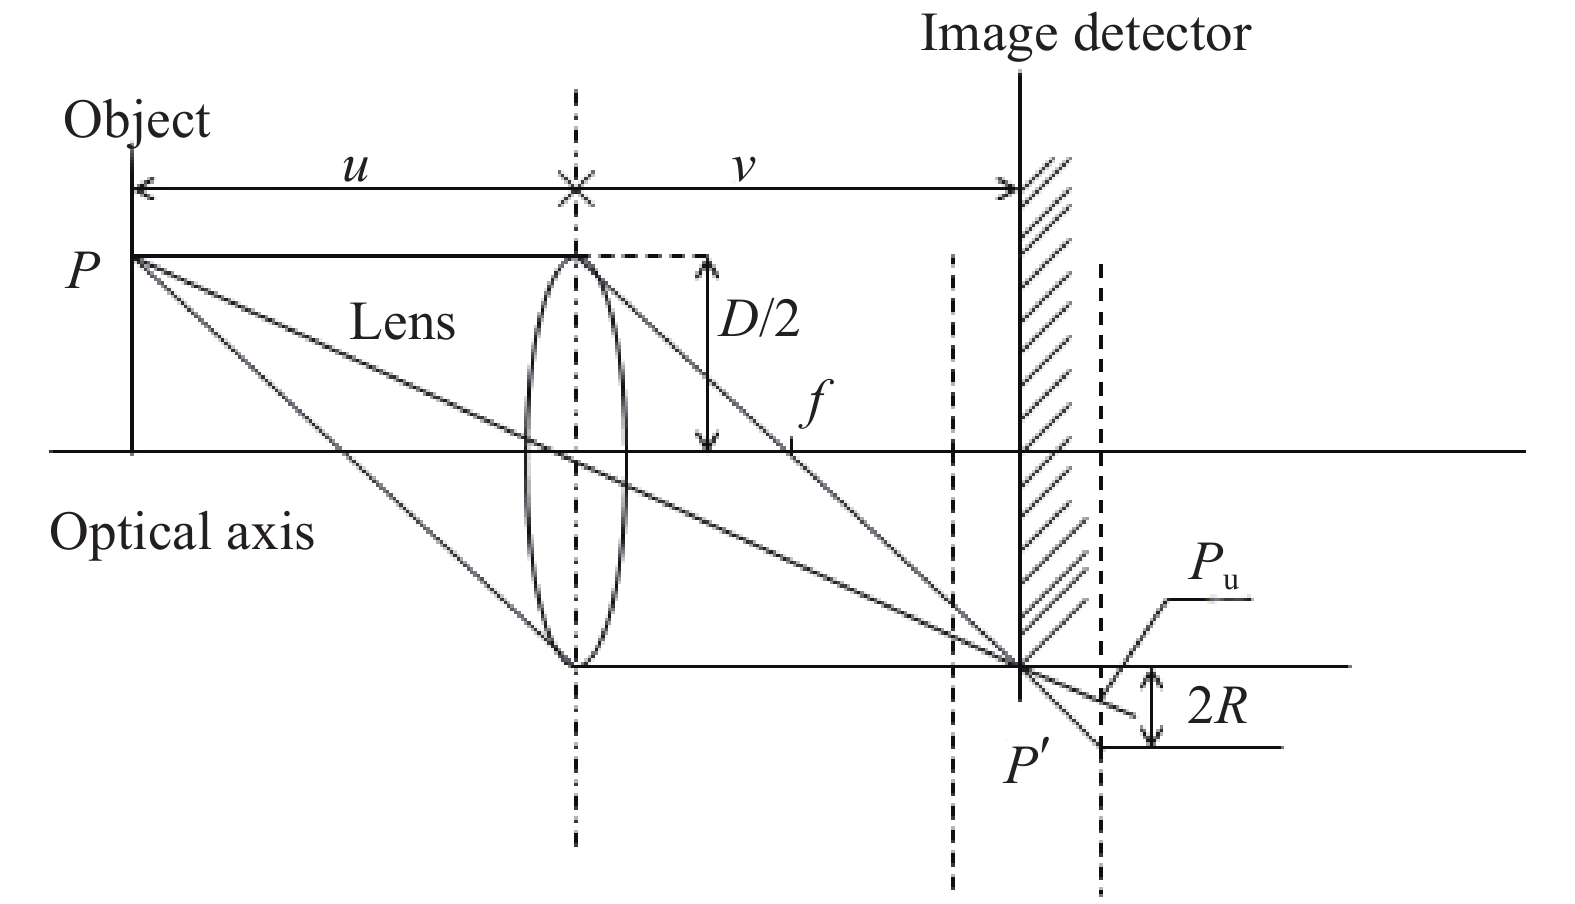 Ideal optical imaging system